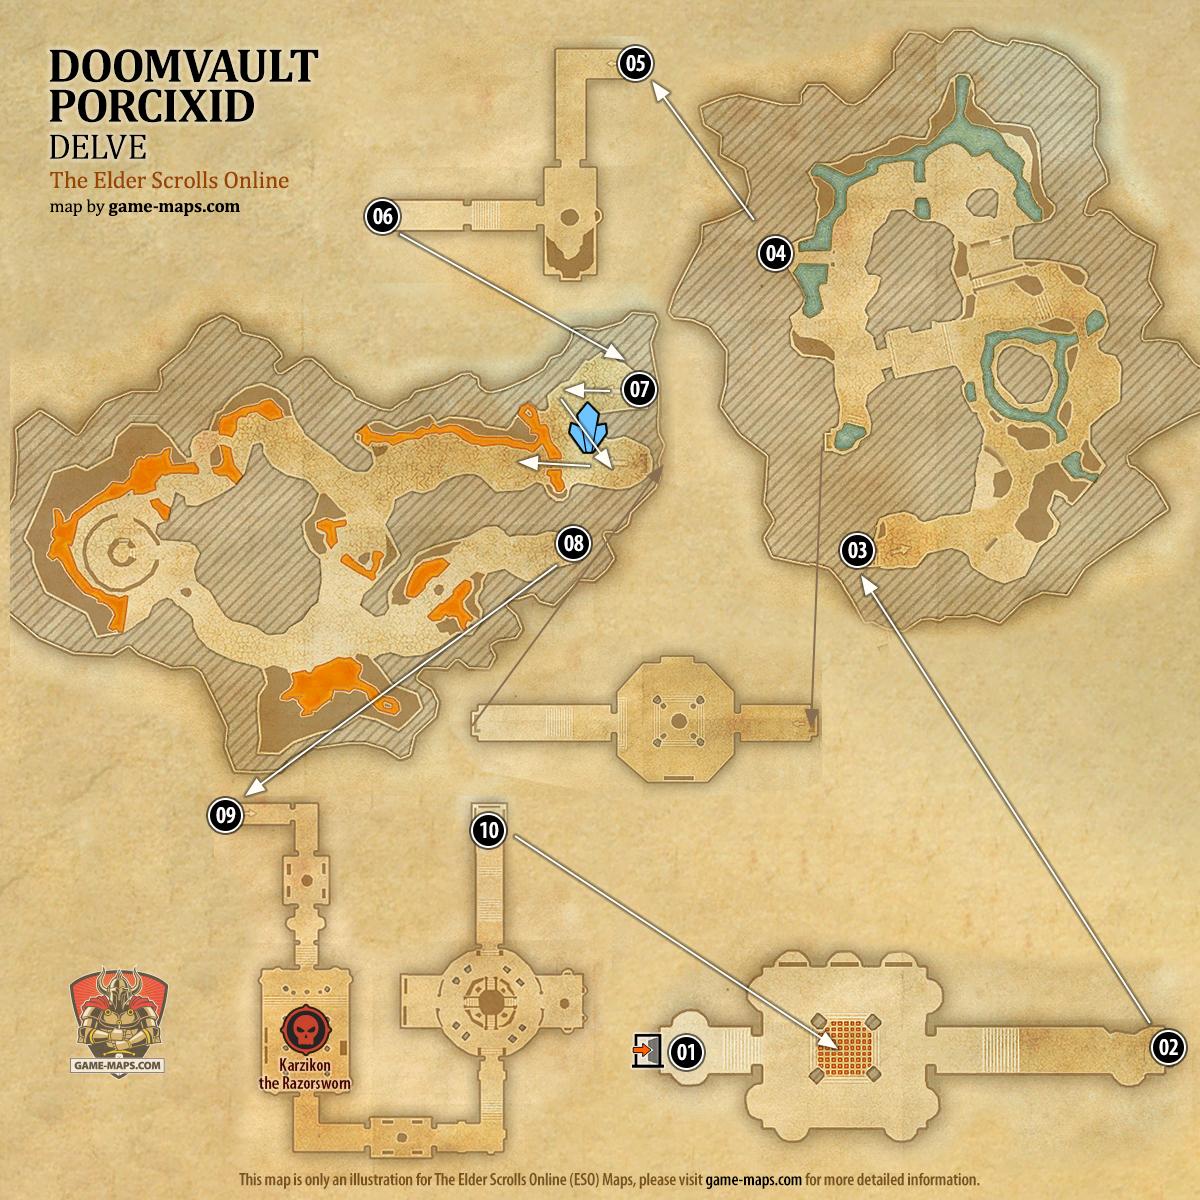 ESO Doomvault Porcixid Delve Map with Skyshard and Boss location in Blackwood